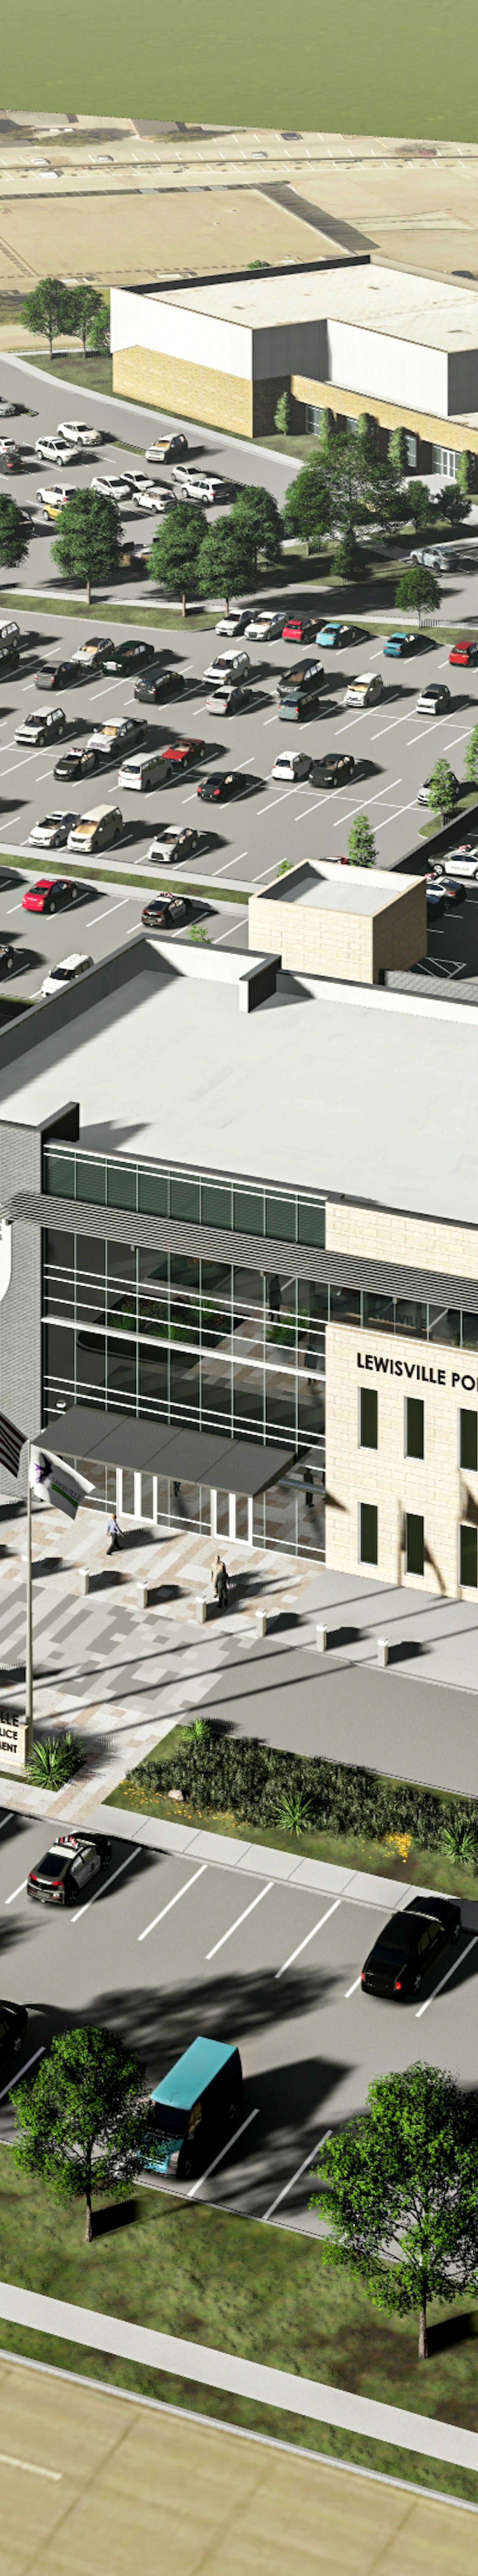                         City of Lewisville Office Allocation and Land Utilization Study
                    